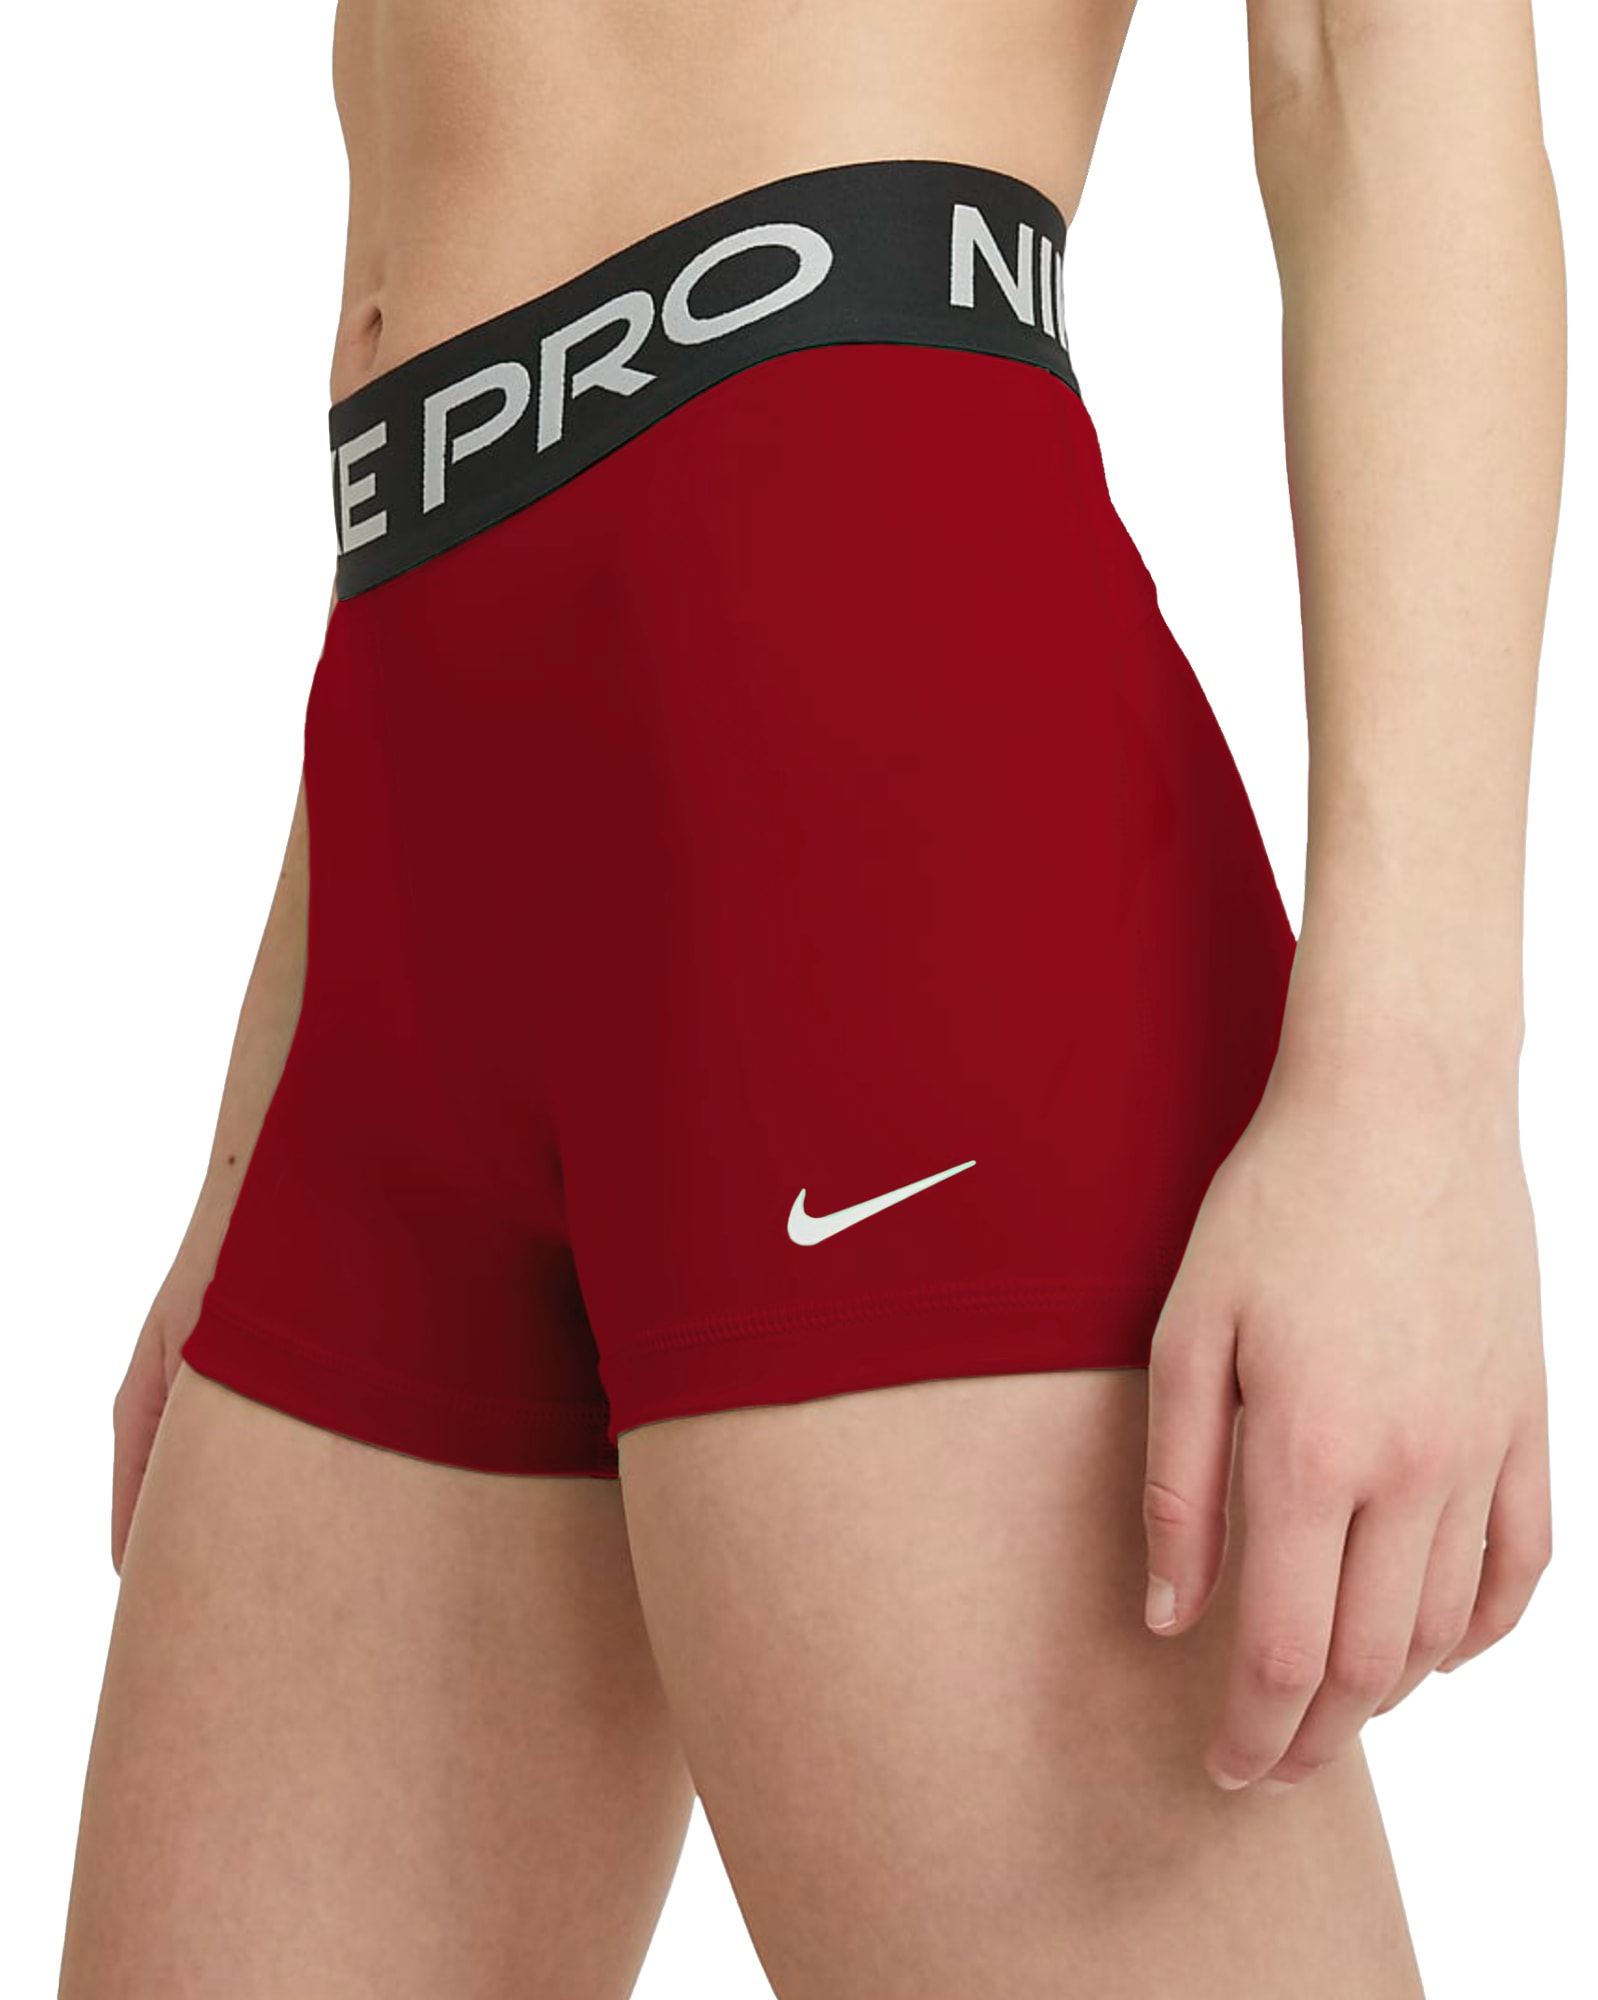 Nike Women's 3" Pro Training - Gym Red / Black / White | Rogue Fitness